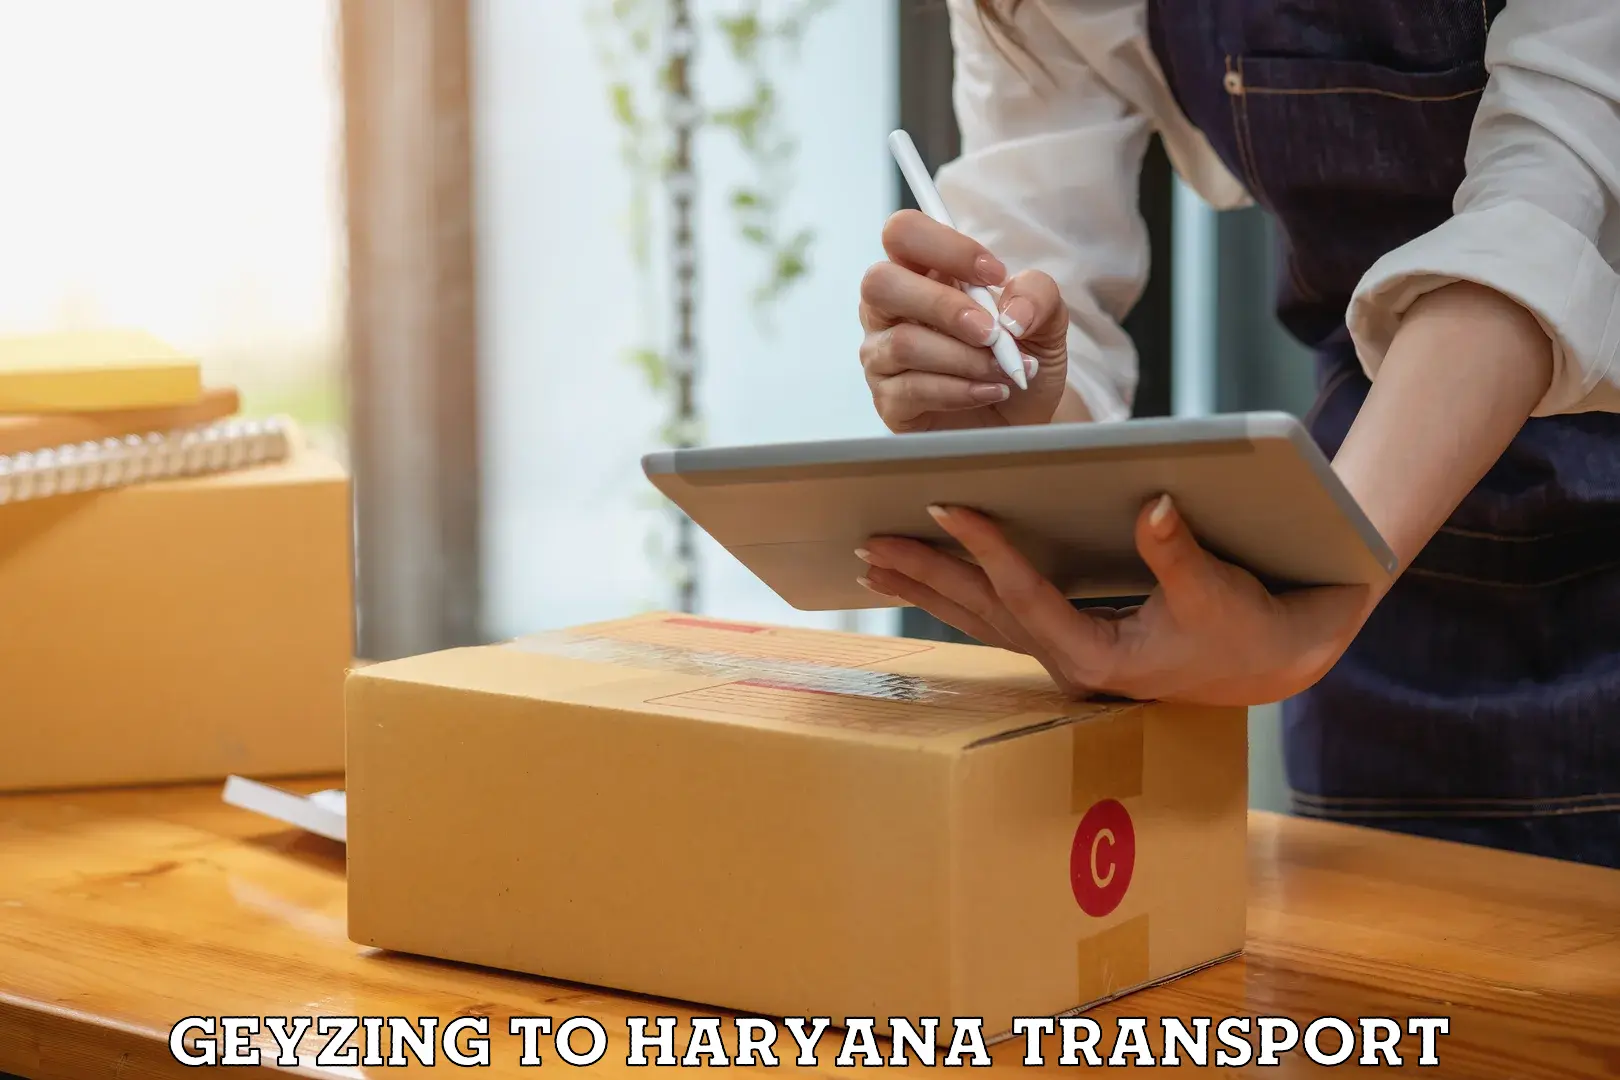 Delivery service Geyzing to Haryana